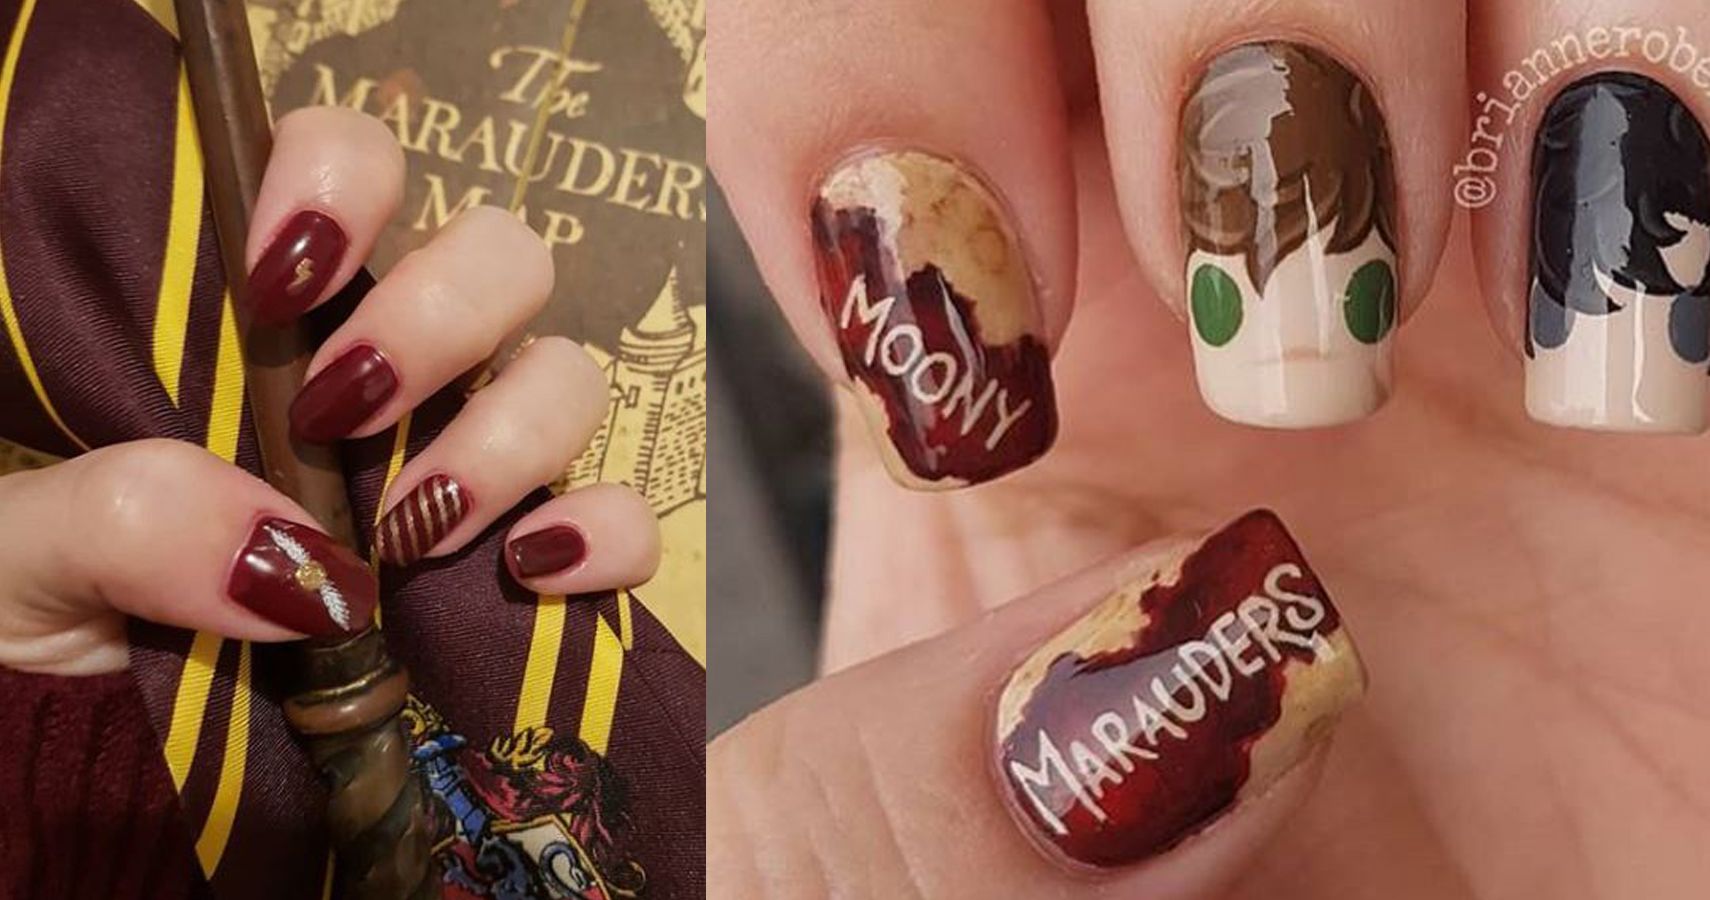 1. "Easy Harry Potter Nail Art Tutorial" - wide 3